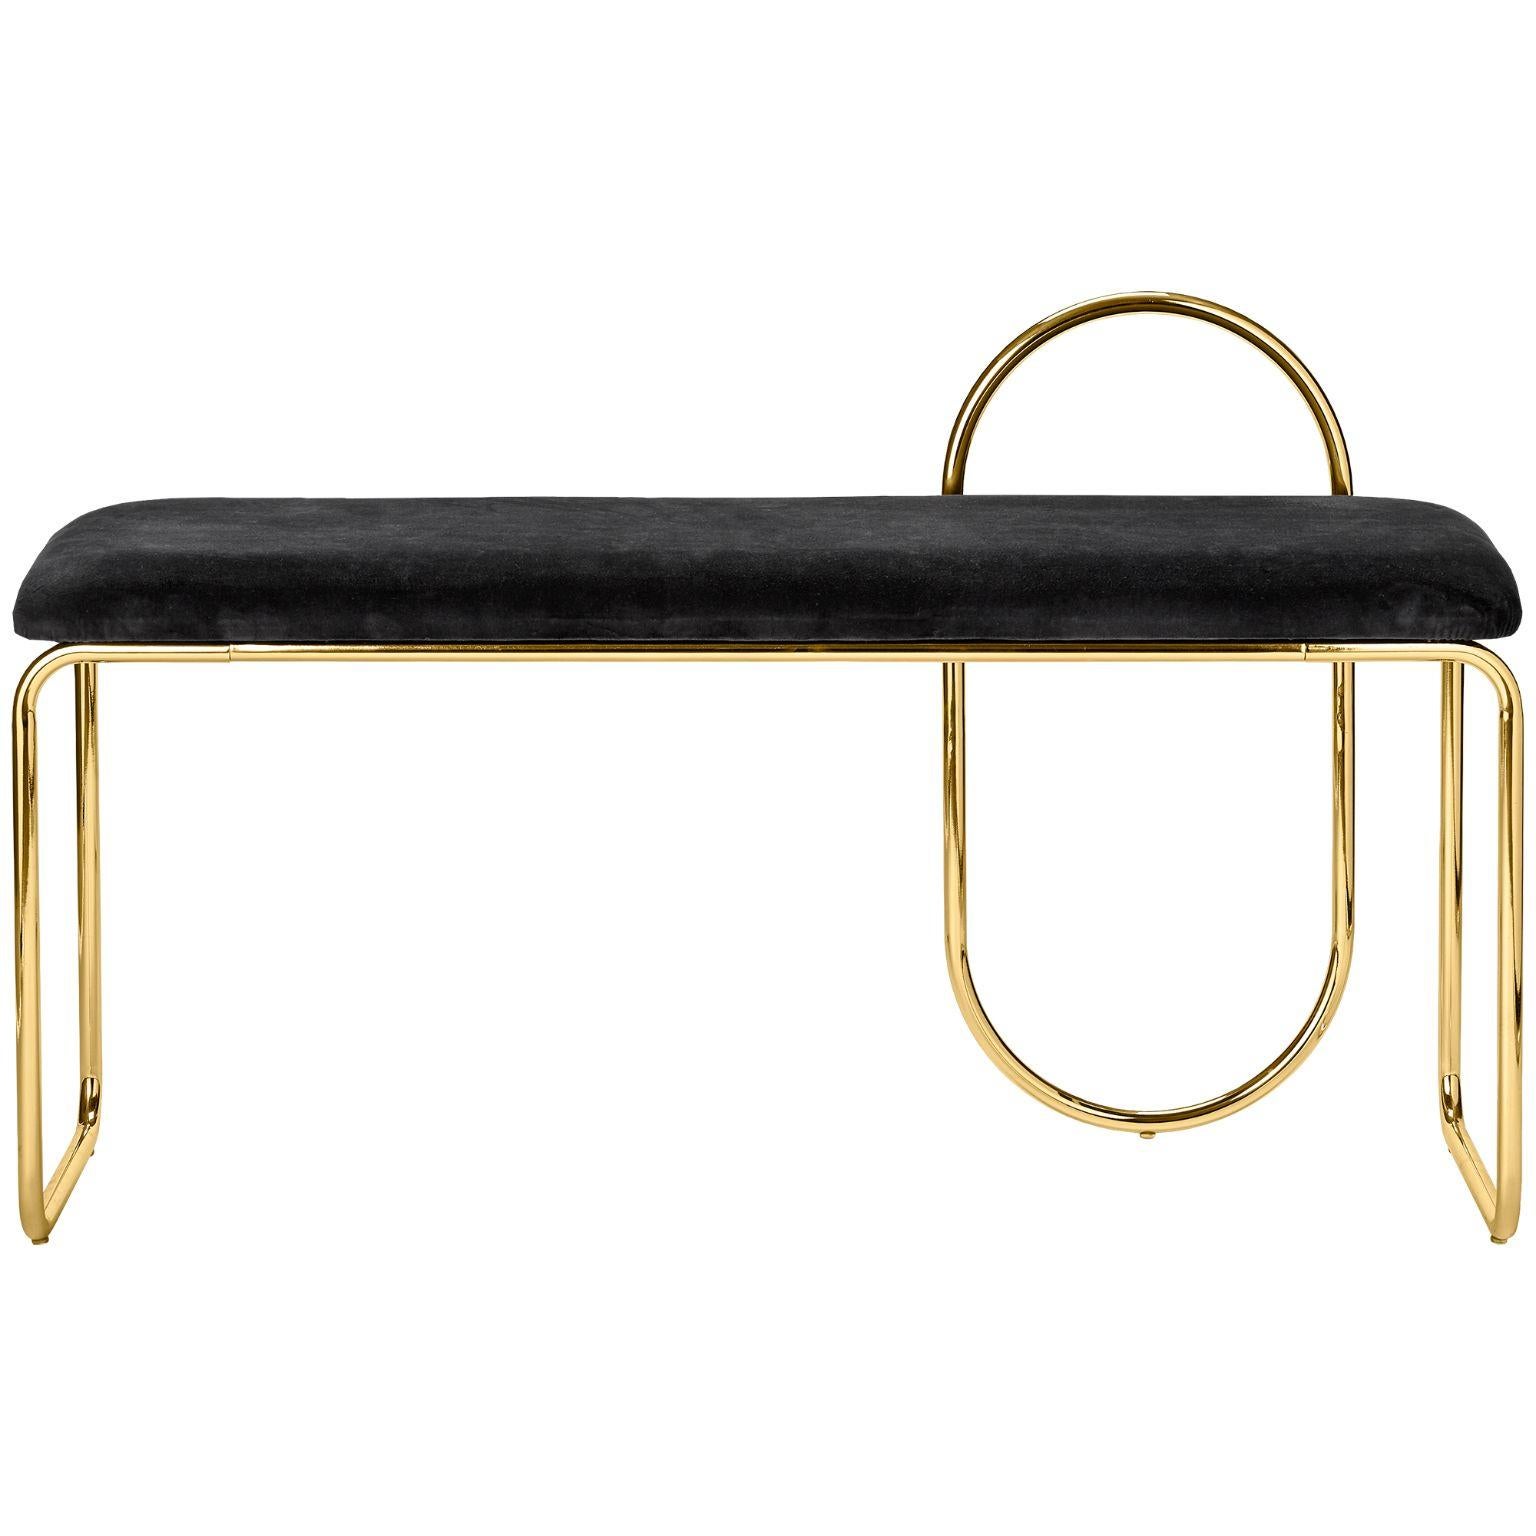 Anthracite velvet and gold Minimalist bench 
Dimensions: L 110 x W 39 x H 68 cm
Materials: Cotton velvet, steel

The collection includes benches, chairs, shelves and mirrors in a wide variety of sizes.